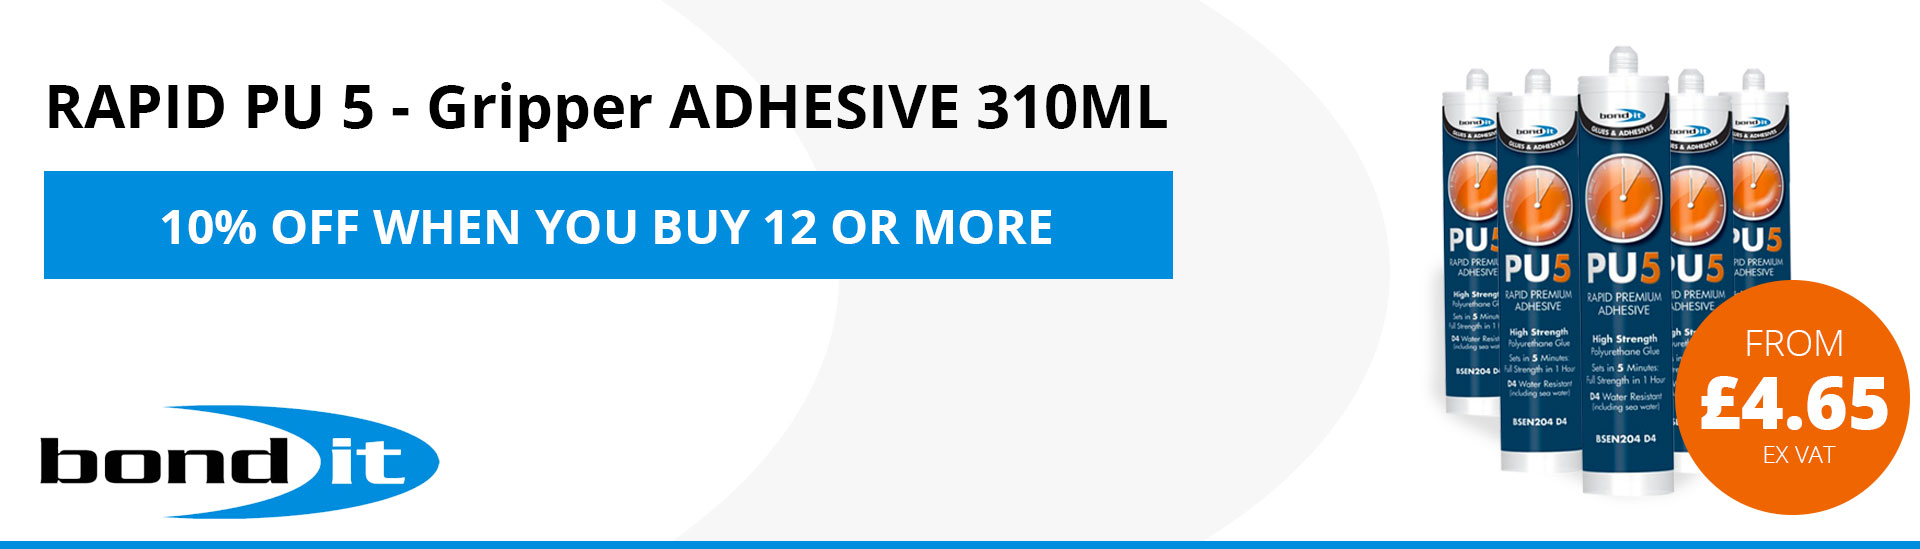 RAPID PU 5 - Gripper ADHESIVE 310ML  10% OFF WHEN YOU BUY 12 OR MORE